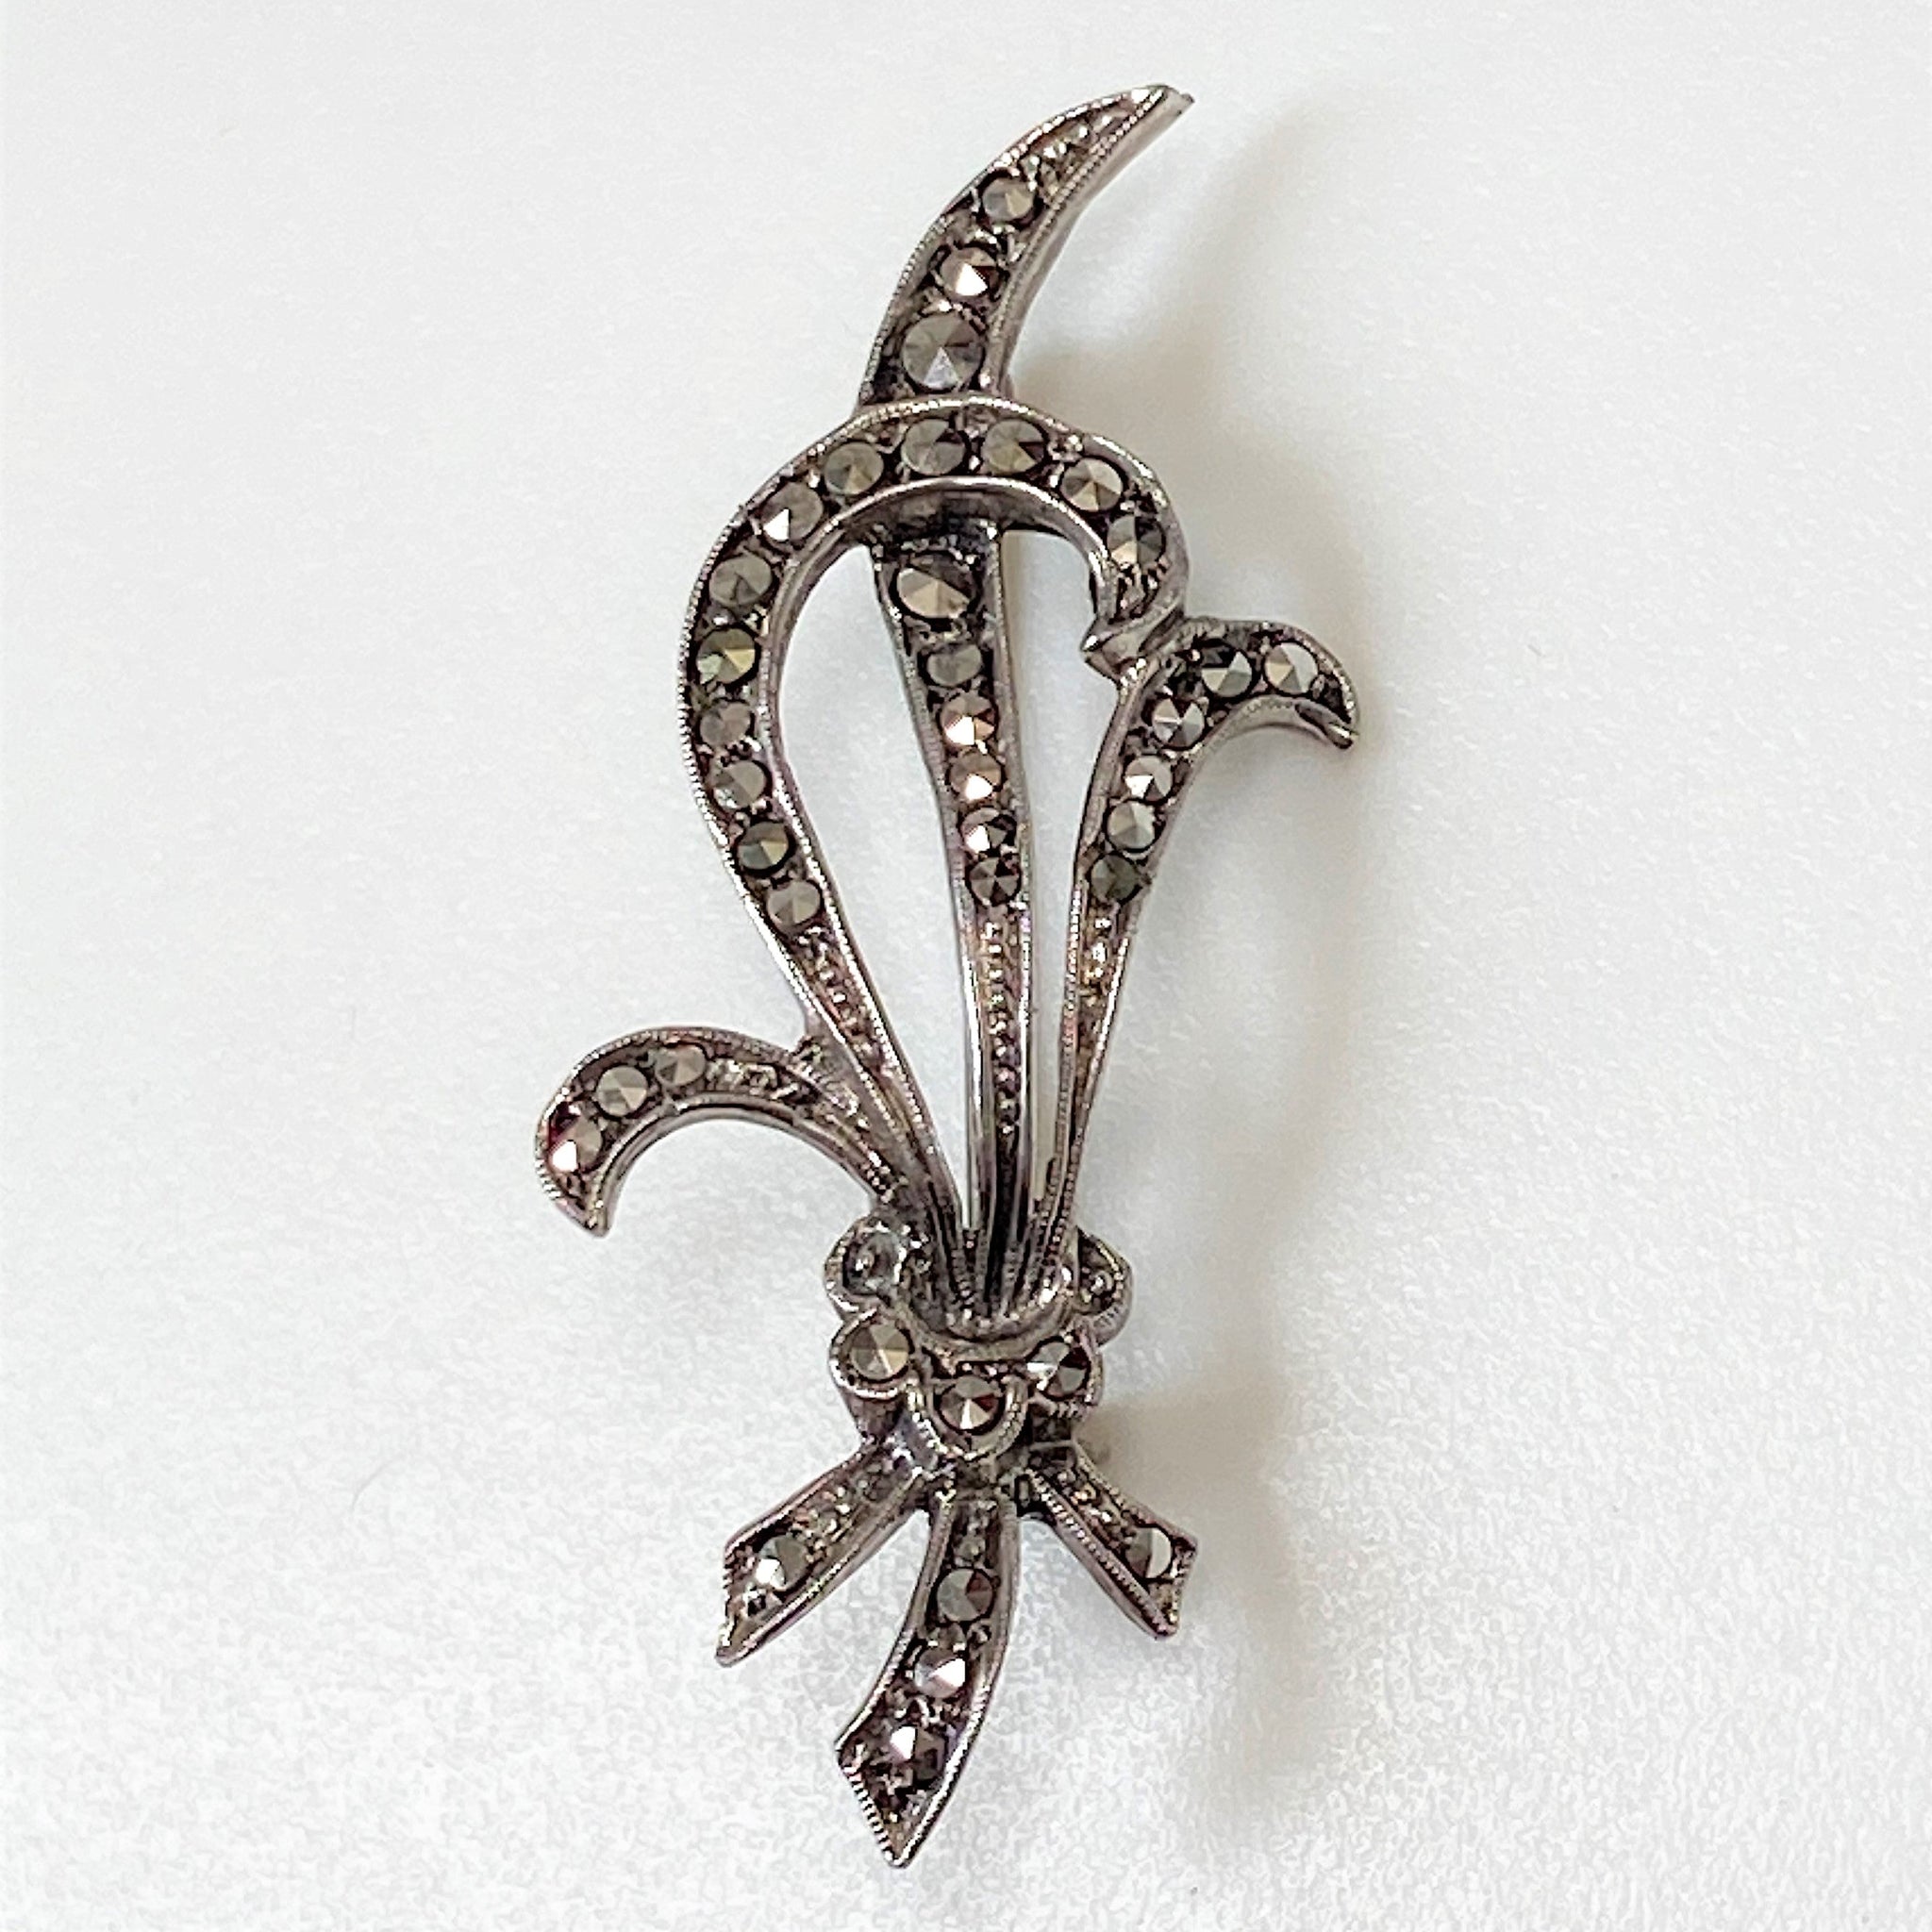 Vintage White Metal and Marcasite Brooch